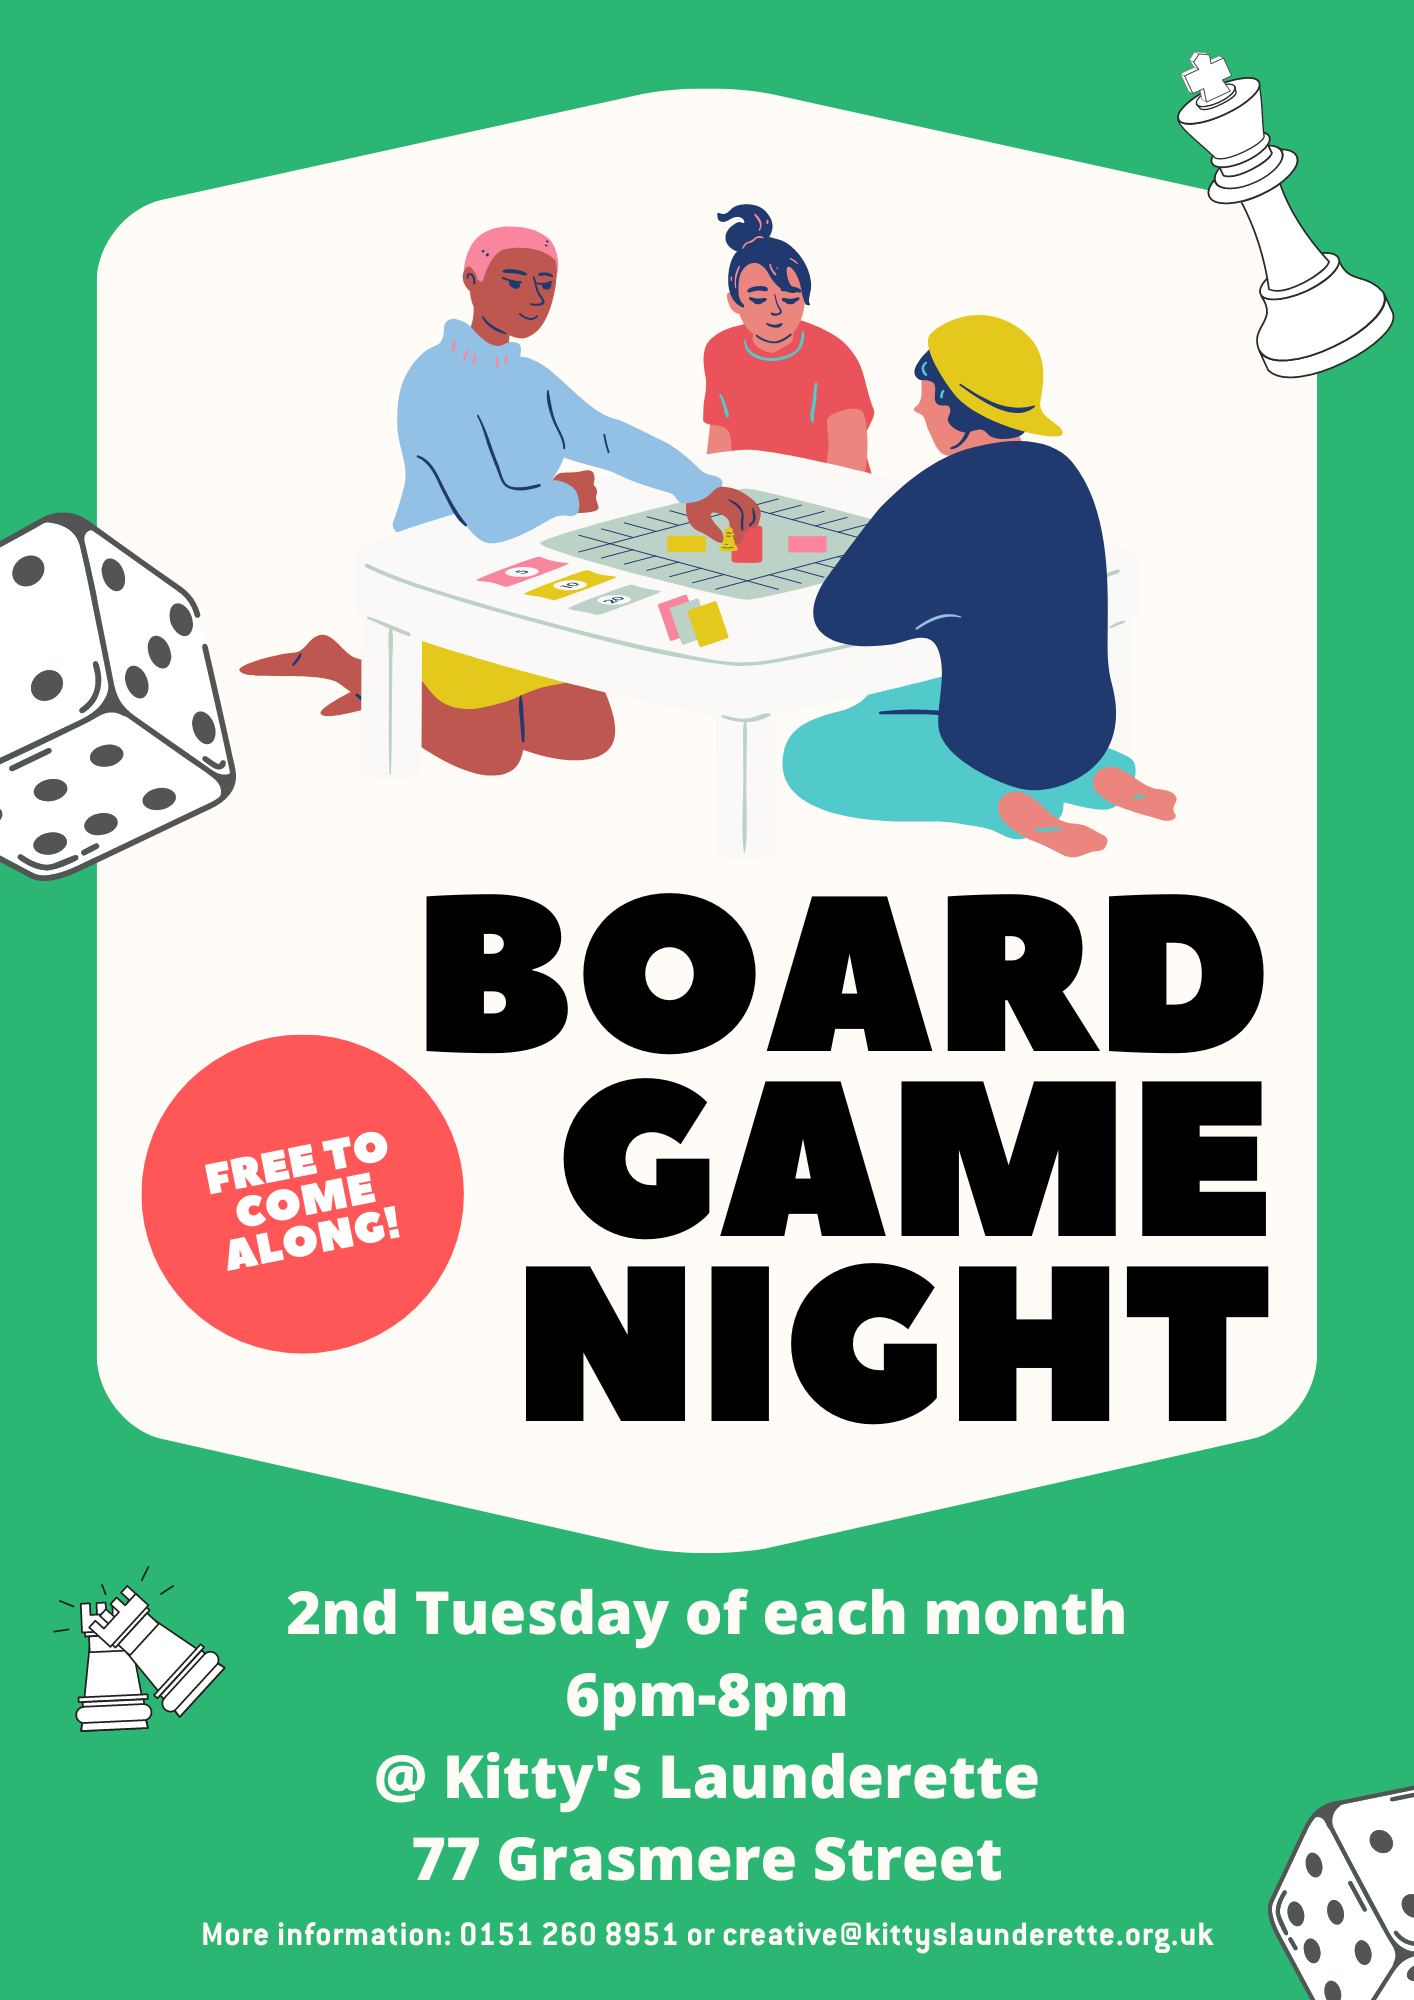 These online board games will save you from cancelling game night plans  #WhenAtHome